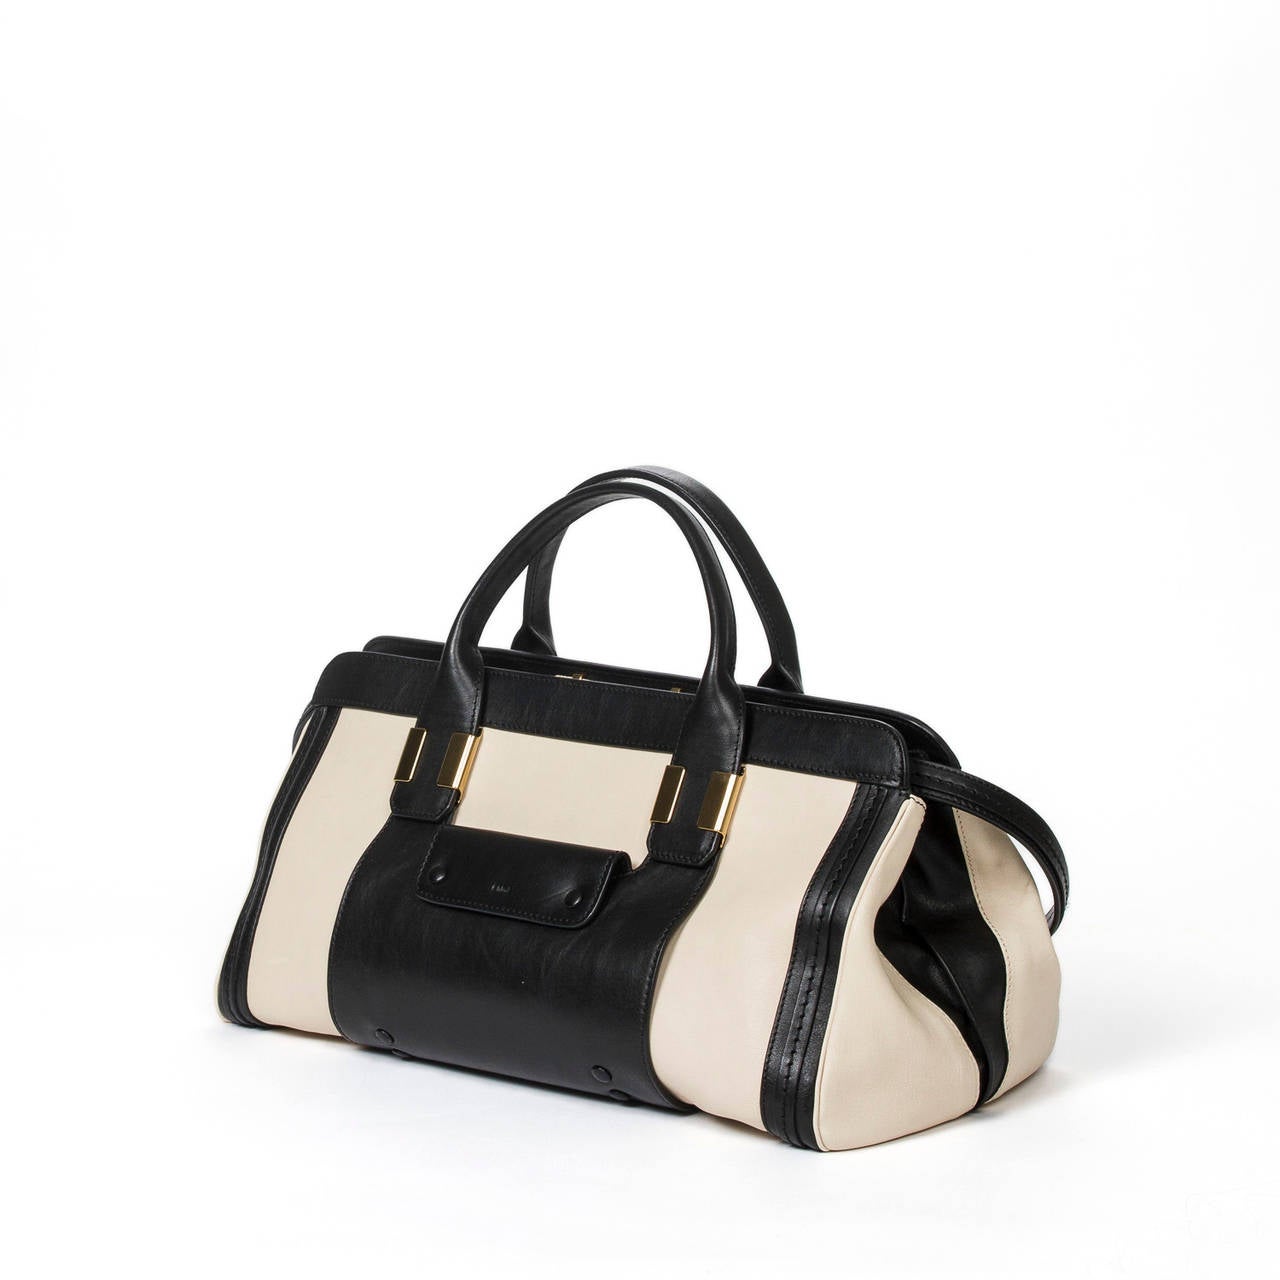 Alice 2way bag in cream and black leather with black leather removable strap, gold tone hardware, snap button closure front pocket and slip back pocket. Black fabric lining with one slip pocket and one zip pocket. Dustbag, authenticity card and care